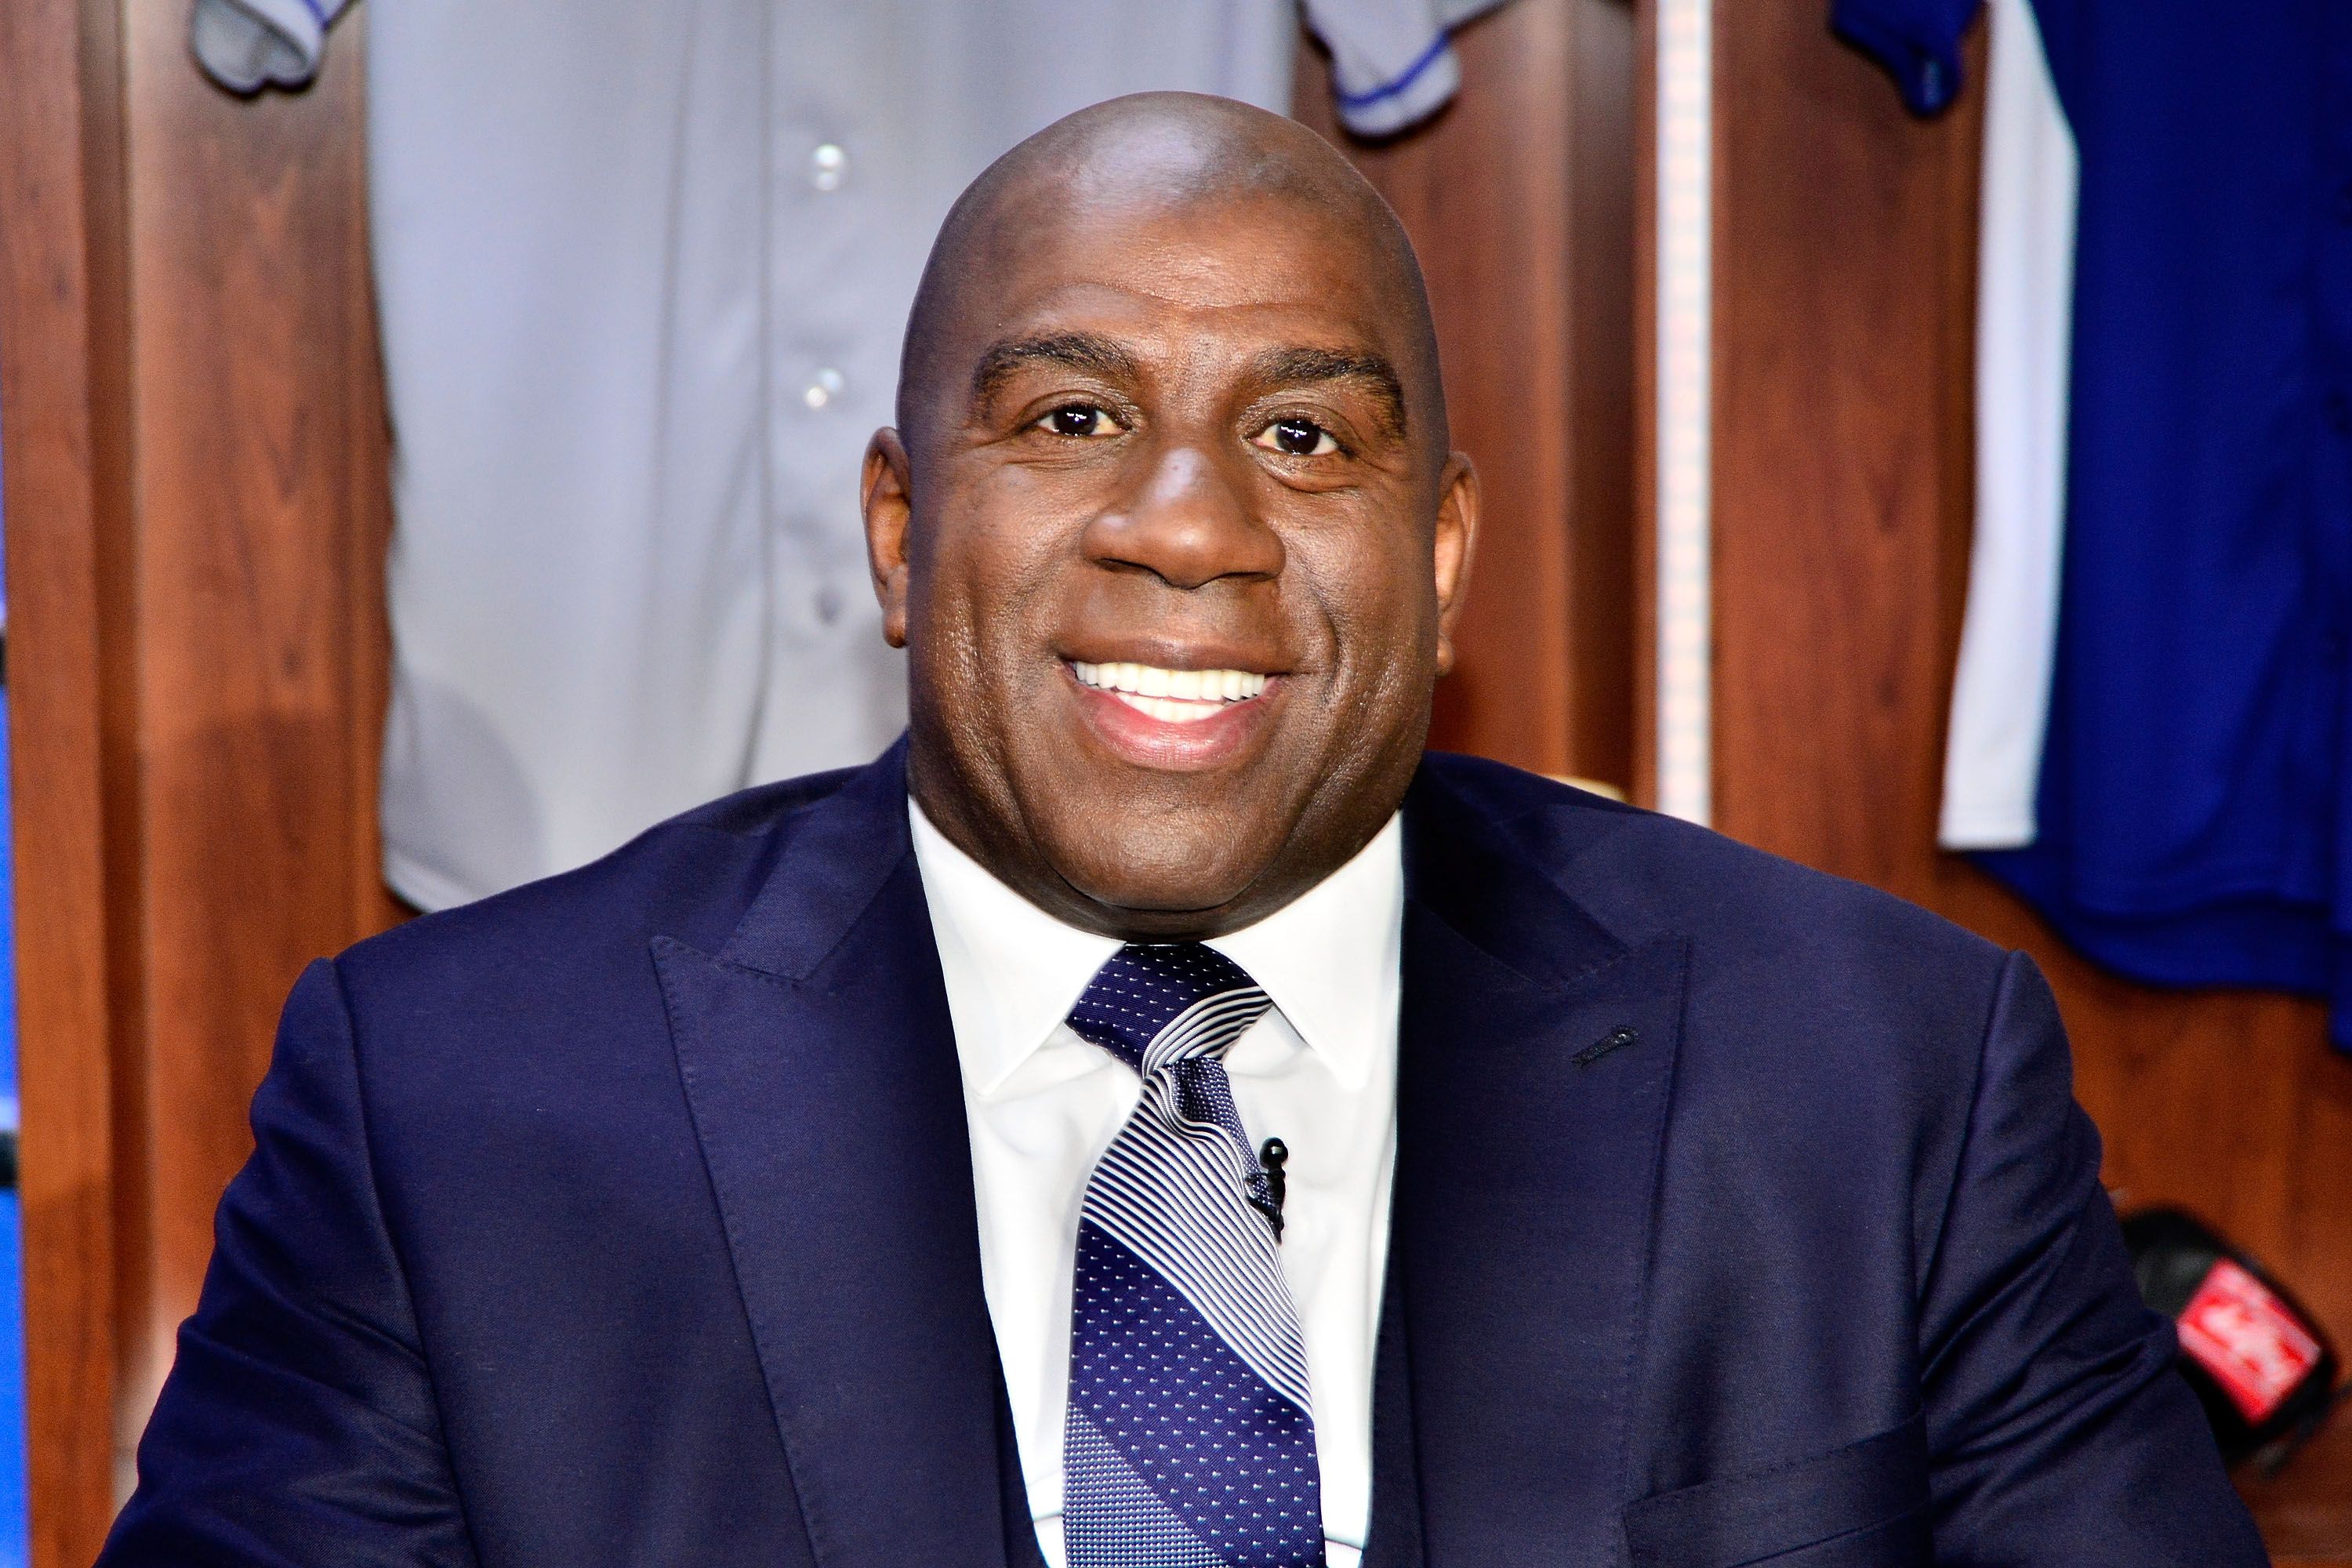  Earvin 'Magic' Johnson attends the launch of SportsNet LA on February 25, 2014  | Photo: Getty Images